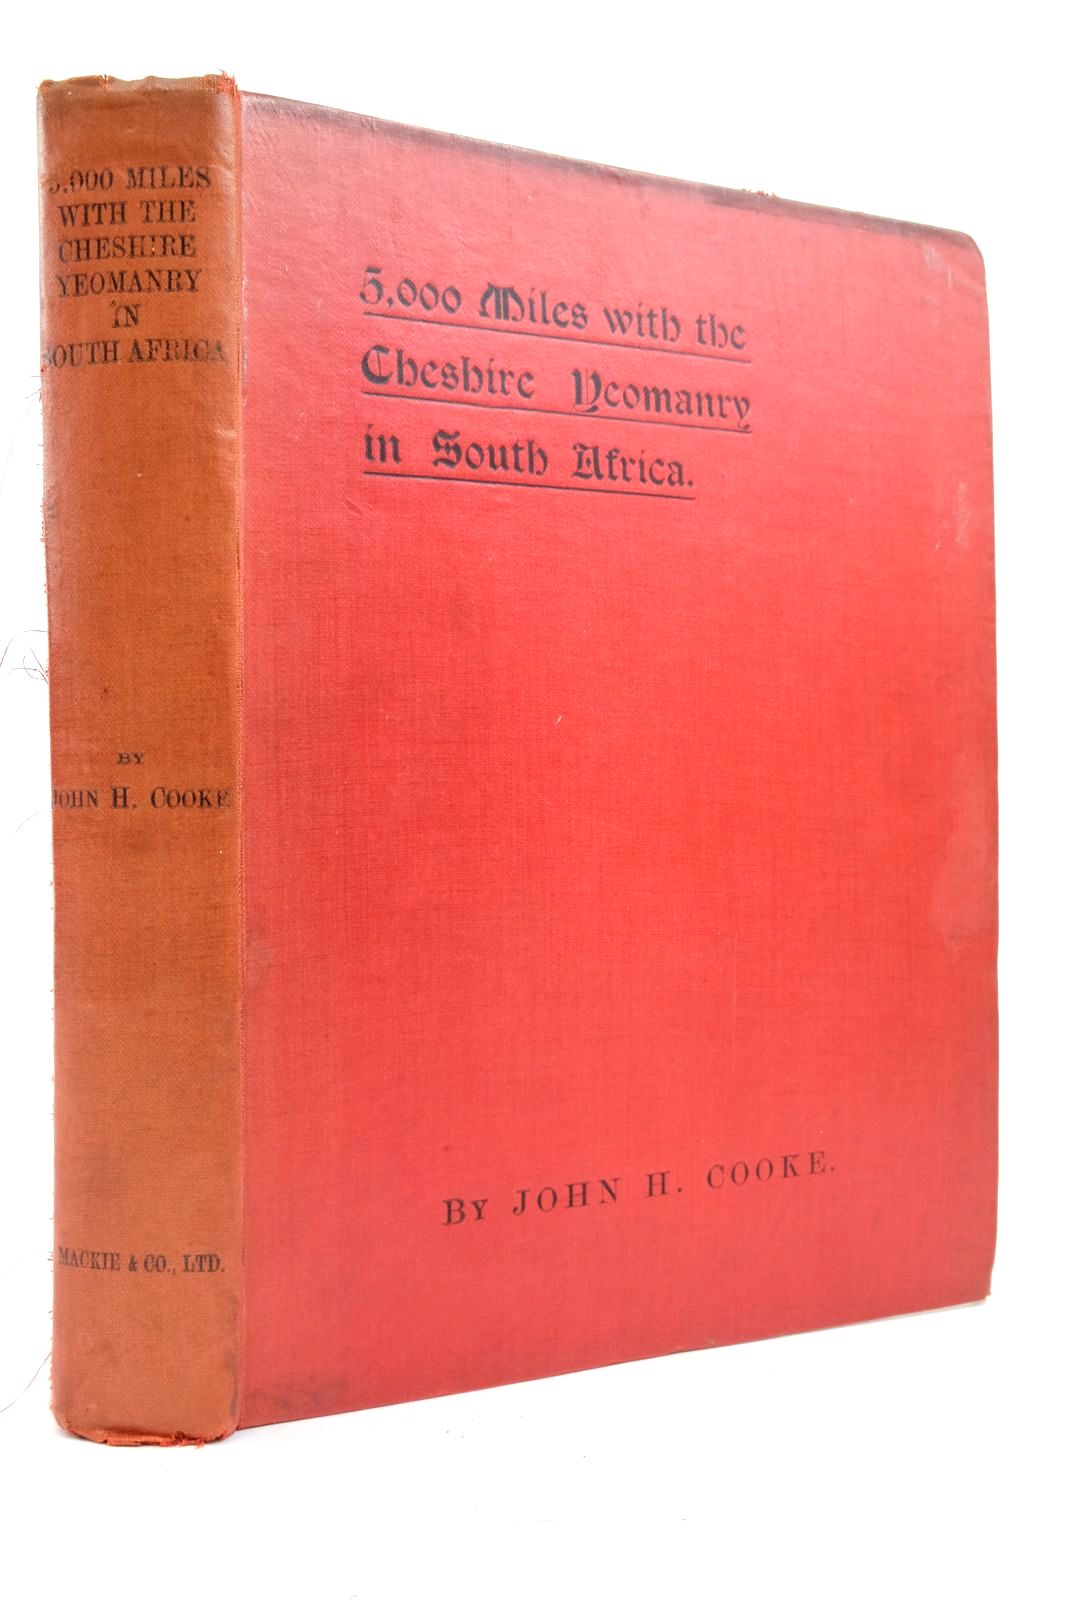 Photo of 5,000 MILES WITH THE CHESHIRE YEOMANRY IN SOUTH AFRICA- Stock Number: 2137729